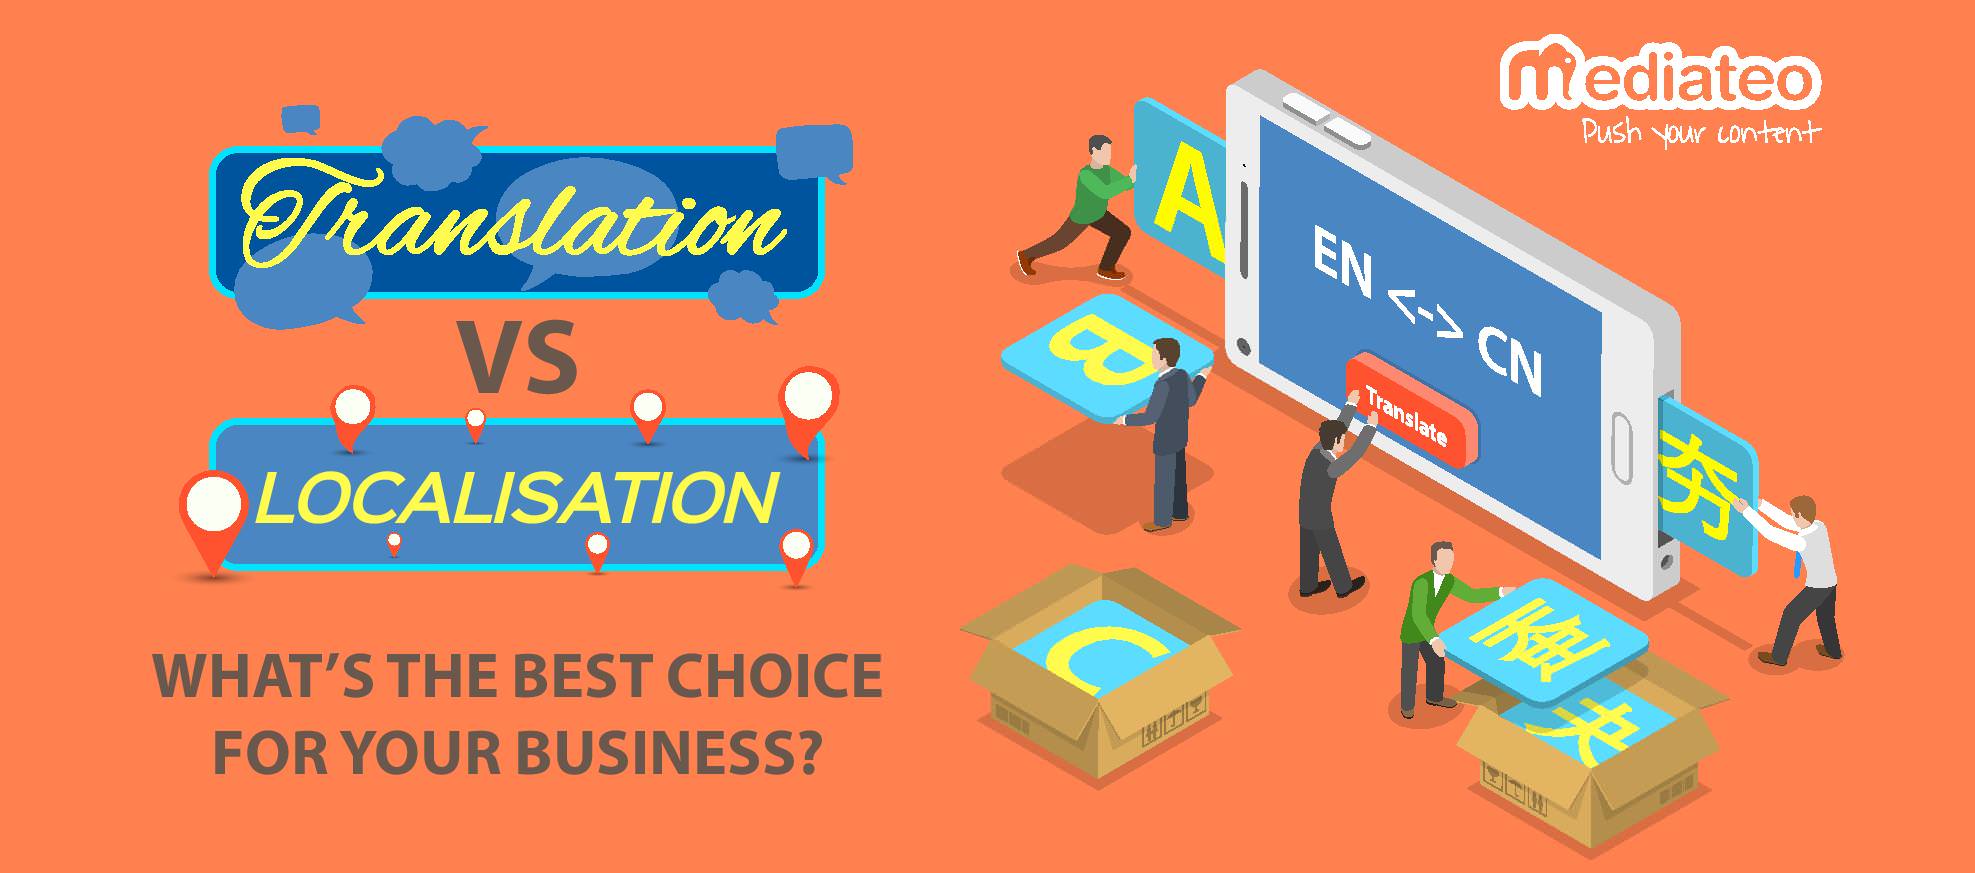 Translation vs. Localisation, What’s the Best Choice for Your Business?